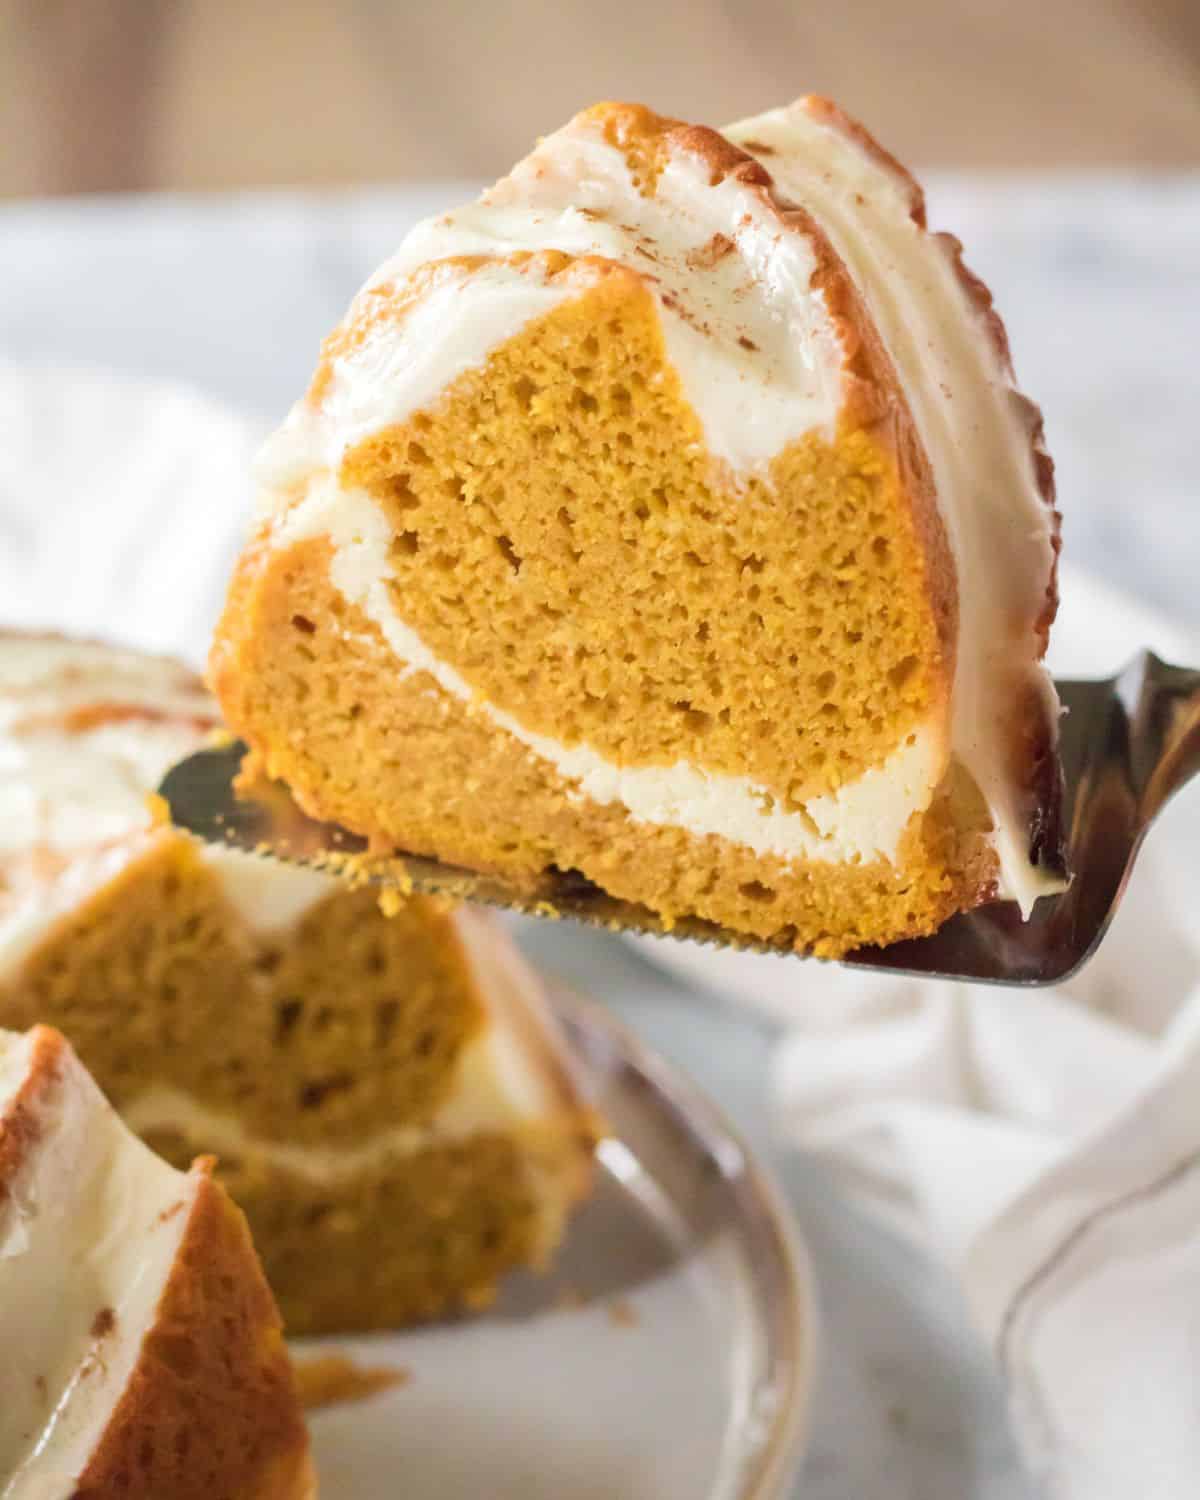 A slice of bundt cake with a cream cheese swirl on a serving knife being taken from the pumpkin bundt cake.